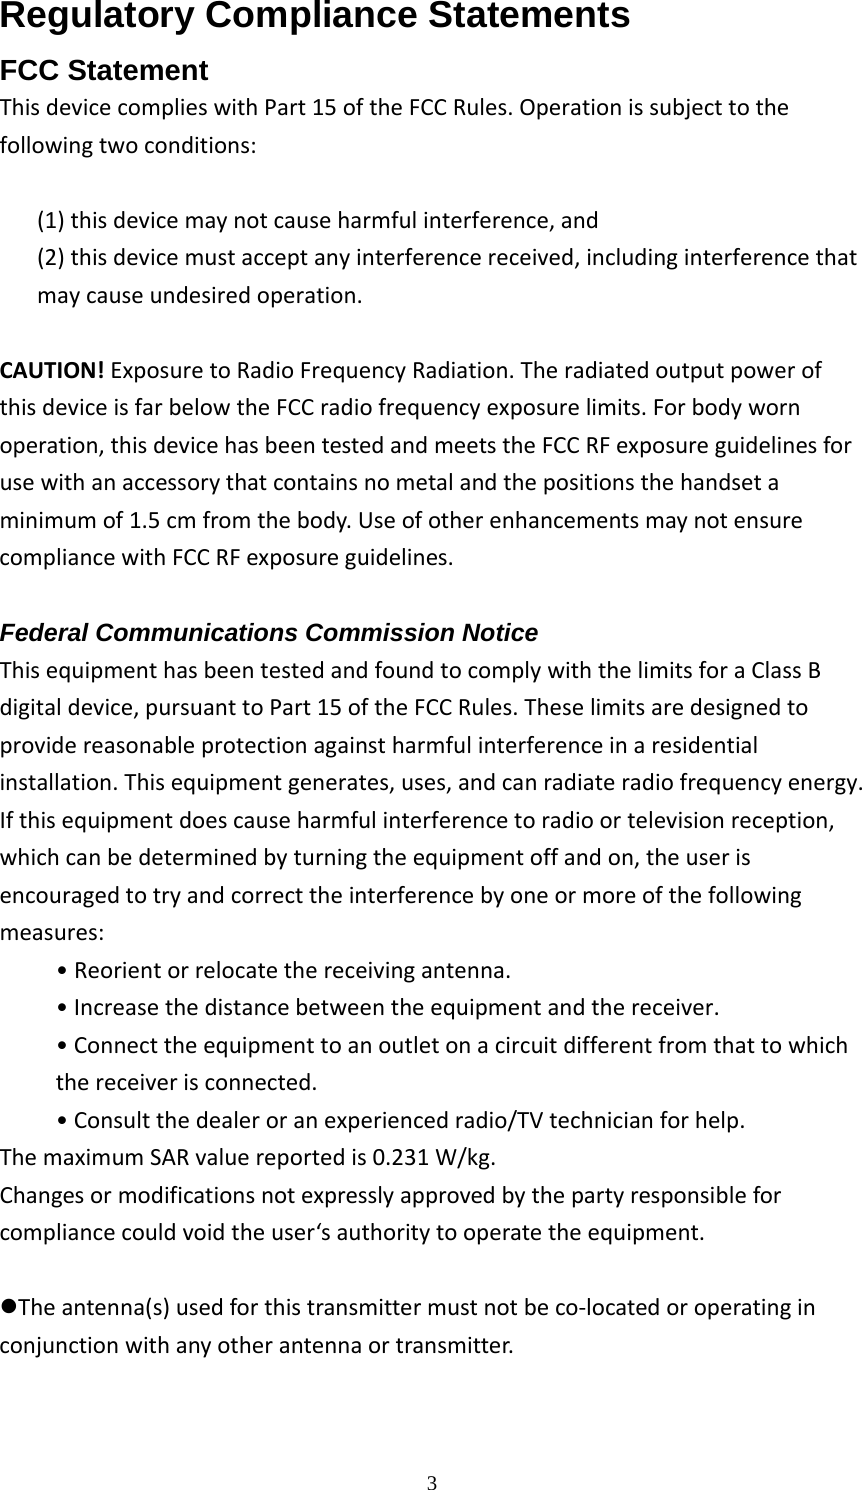  3Regulatory Compliance Statements FCC Statement ThisdevicecomplieswithPart15oftheFCCRules.Operationissubjecttothefollowingtwoconditions:(1)thisdevicemaynotcauseharmfulinterference,and(2)thisdevicemustacceptanyinterferencereceived,includinginterferencethatmaycauseundesiredoperation.CAUTION!ExposuretoRadioFrequencyRadiation.TheradiatedoutputpowerofthisdeviceisfarbelowtheFCCradiofrequencyexposurelimits.Forbodywornoperation,thisdevicehasbeentestedandmeetstheFCCRFexposureguidelinesforusewithanaccessorythatcontainsnometalandthepositionsthehandsetaminimumof1.5cmfromthebody.UseofotherenhancementsmaynotensurecompliancewithFCCRFexposureguidelines.  Federal Communications Commission Notice ThisequipmenthasbeentestedandfoundtocomplywiththelimitsforaClassBdigitaldevice,pursuanttoPart15oftheFCCRules.Theselimitsaredesignedtoprovidereasonableprotectionagainstharmfulinterferenceinaresidentialinstallation.Thisequipmentgenerates,uses,andcanradiateradiofrequencyenergy.Ifthisequipmentdoescauseharmfulinterferencetoradioortelevisionreception,whichcanbedeterminedbyturningtheequipmentoffandon,theuserisencouragedtotryandcorrecttheinterferencebyoneormoreofthefollowingmeasures:• Reorientorrelocatethereceivingantenna.•Increasethedistancebetweentheequipmentandthereceiver.•Connecttheequipmenttoanoutletonacircuitdifferentfromthattowhichthereceiverisconnected.•Consultthedealeroranexperiencedradio/TVtechnicianforhelp.ThemaximumSARvaluereportedis0.231W/kg.Changesormodificationsnotexpresslyapprovedbythepartyresponsibleforcompliancecouldvoidtheuser‘sauthoritytooperatetheequipment.zTheantenna(s)usedforthistransmittermustnotbeco‐locatedoroperatinginconjunctionwithanyotherantennaortransmitter.  